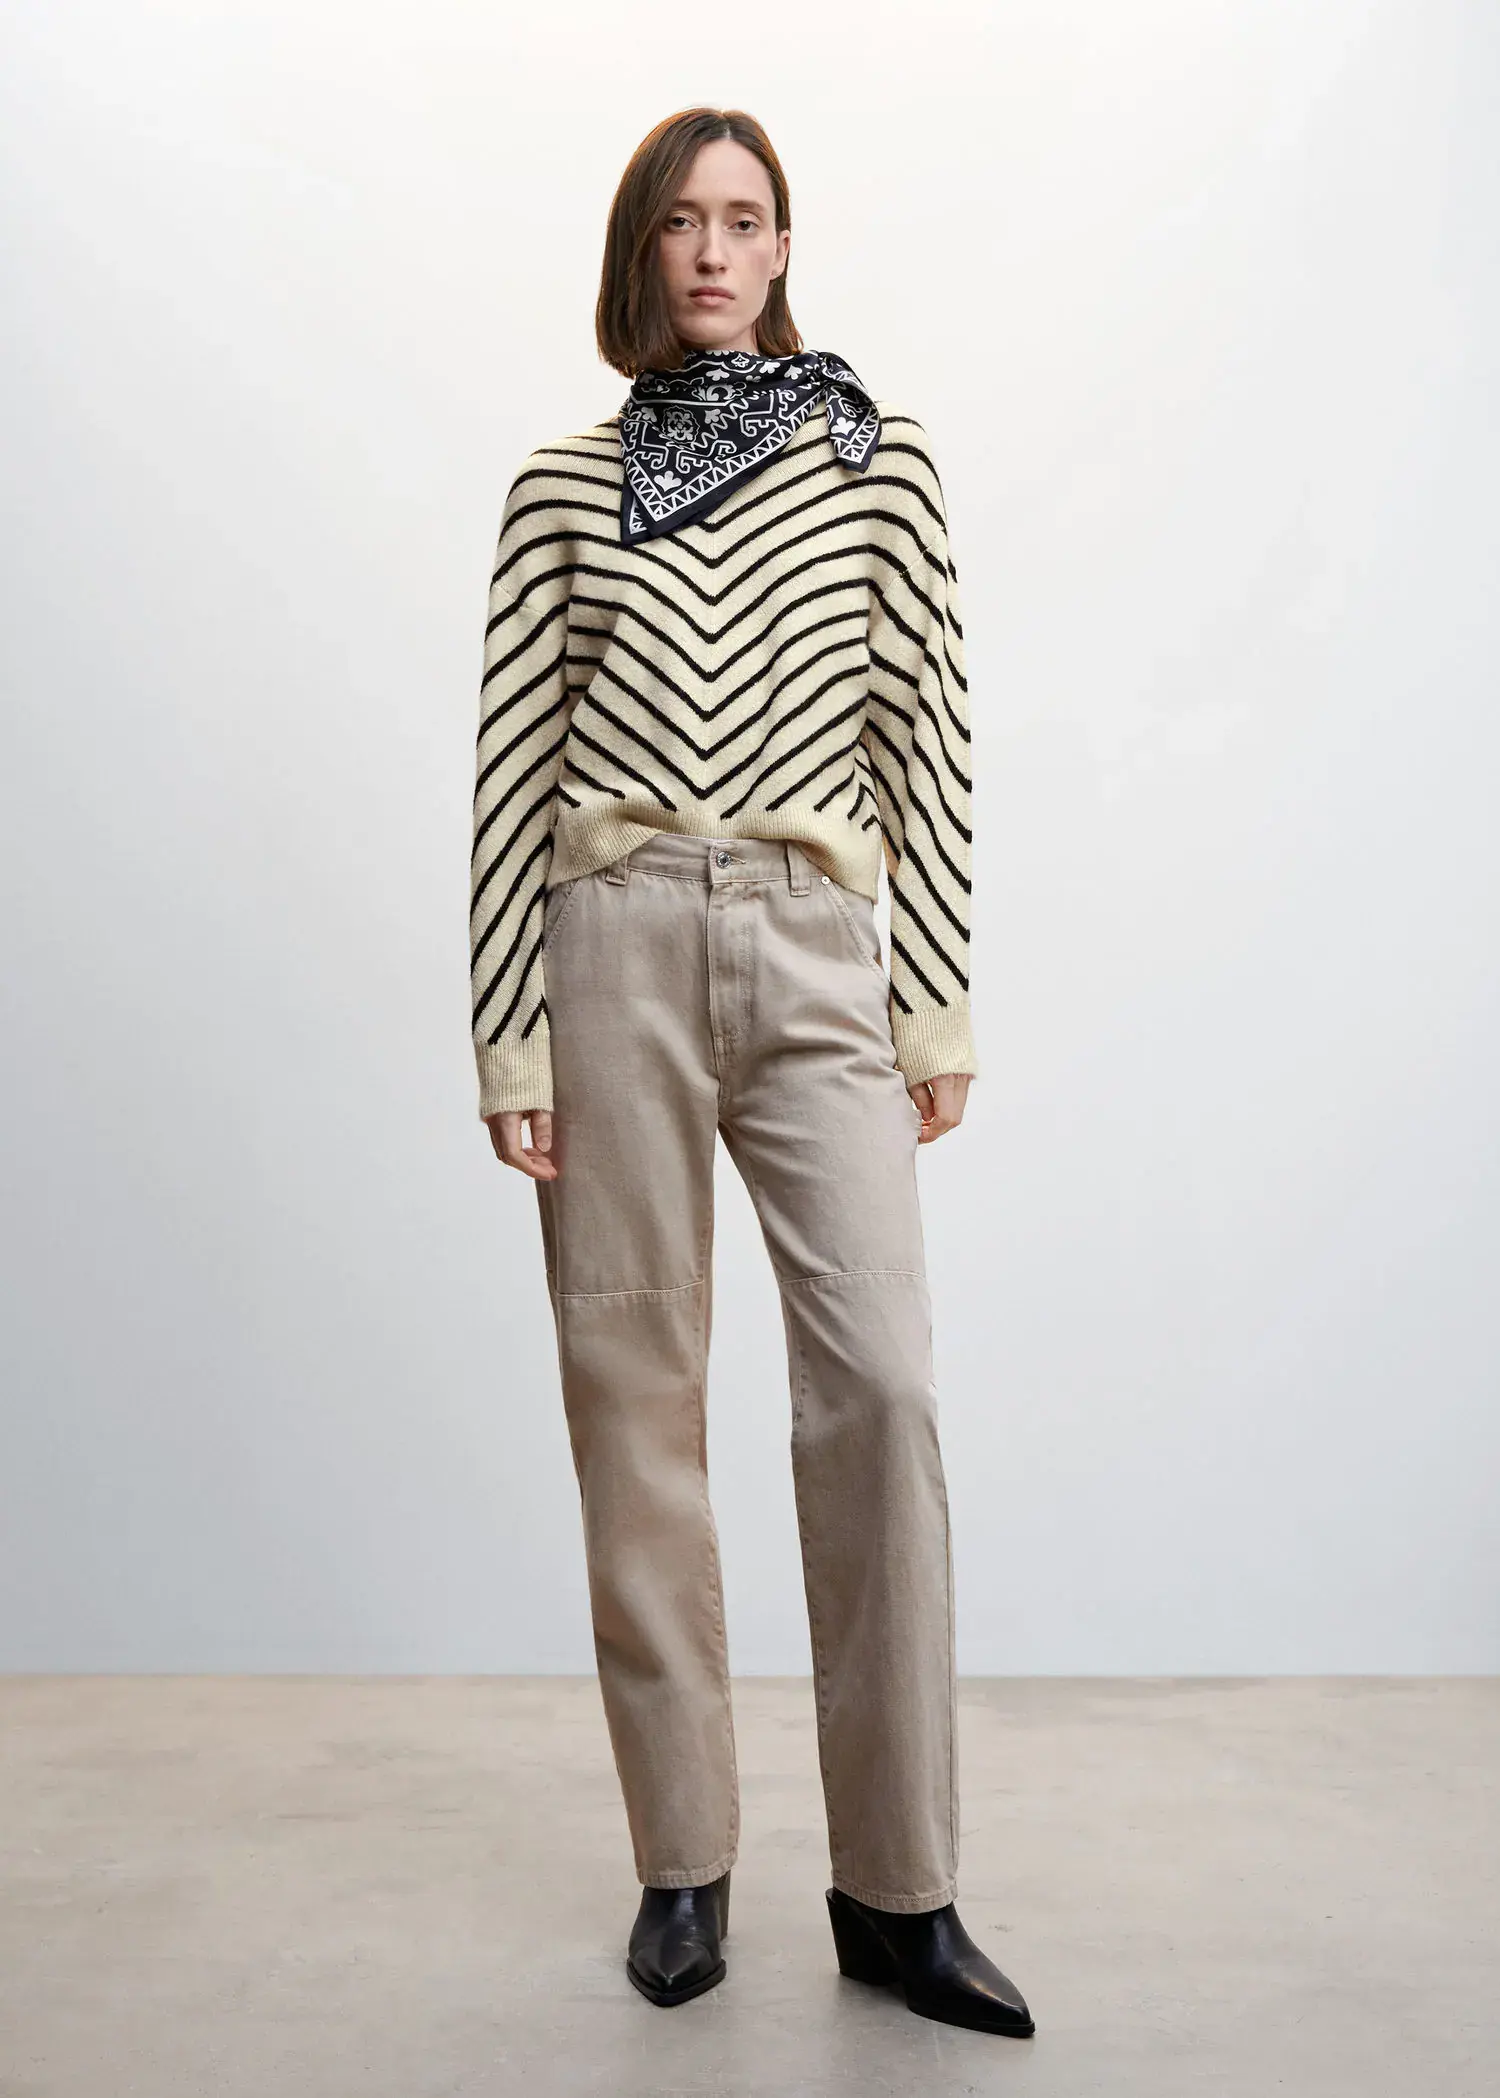 Mango Stripe-print sweater with Perkins neck. a woman in a striped sweater and beige pants. 